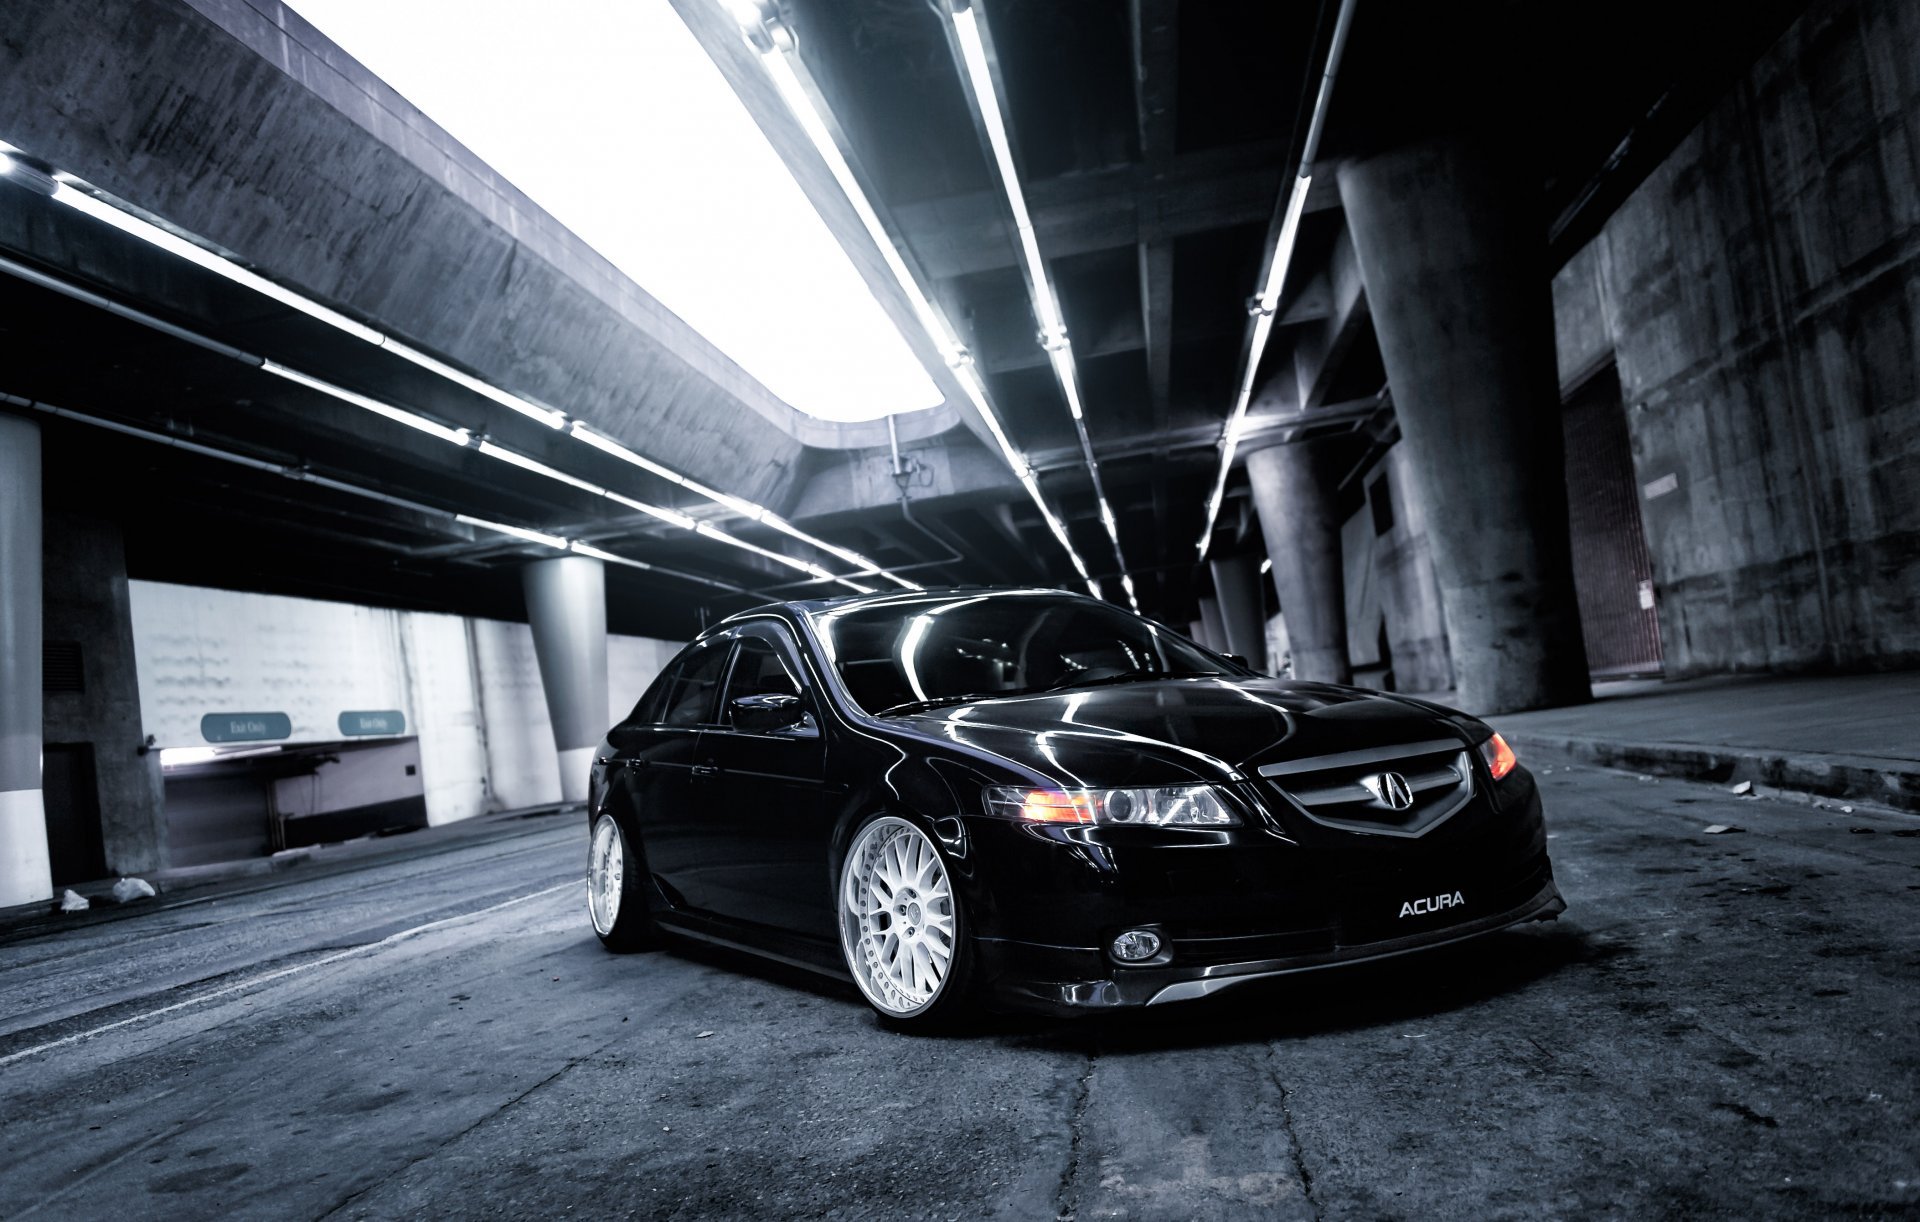 Free Download Honda Accord Acura Tl Front Chord Black Tuning Hd Wallpaper 1920x1222 For Your Desktop Mobile Tablet Explore 36 Honda Accord Wallpapers Honda Accord Wallpaper Honda Accord Wallpapers